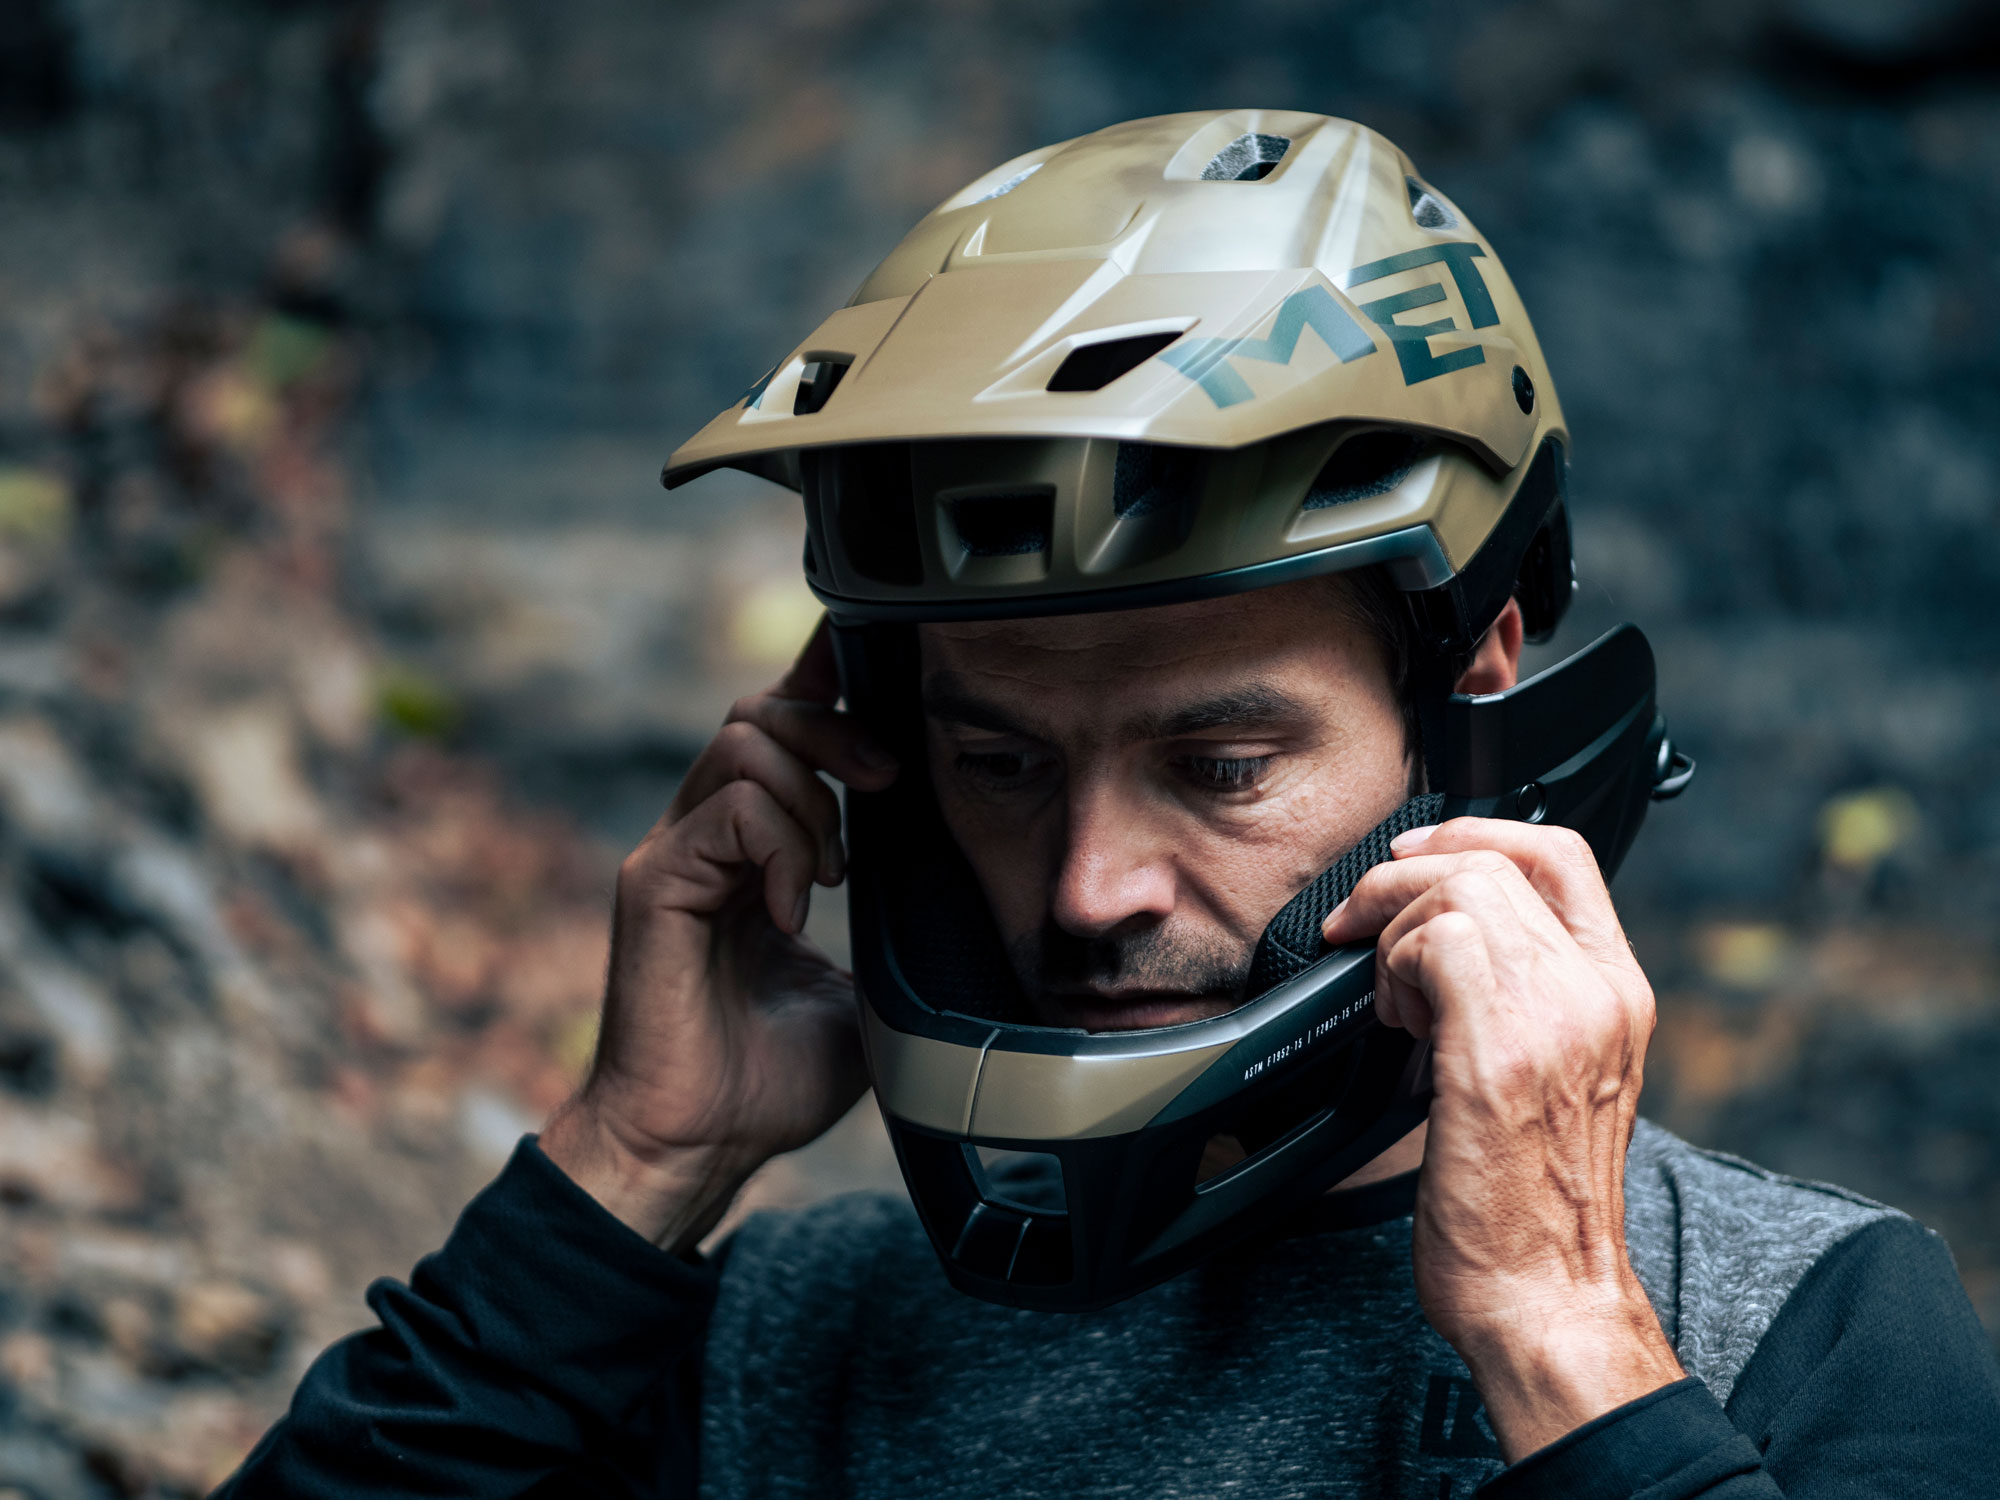 AASQ: How do I decide between a convertible or a traditional full-face helmet?